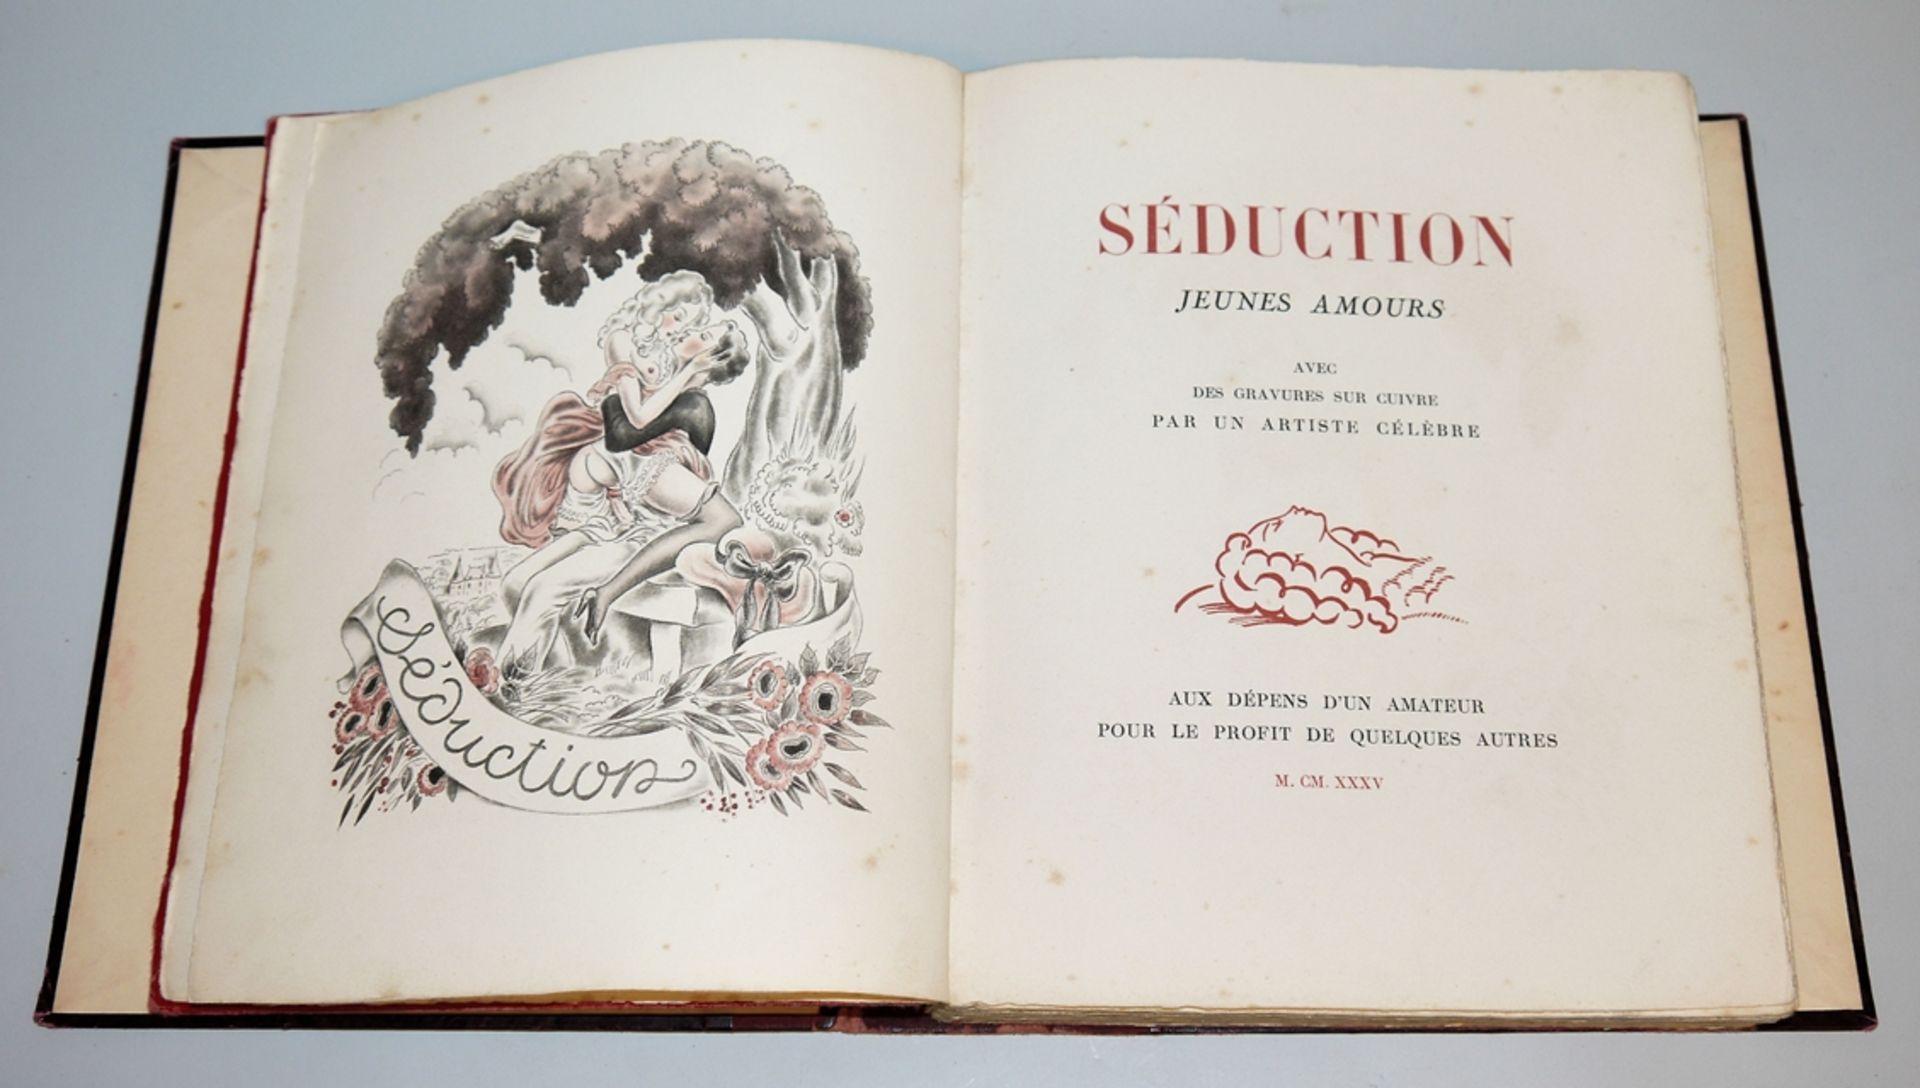 Séduction, jeunes amours, erotic novel with illustrations by André Collot, limited edition, France 